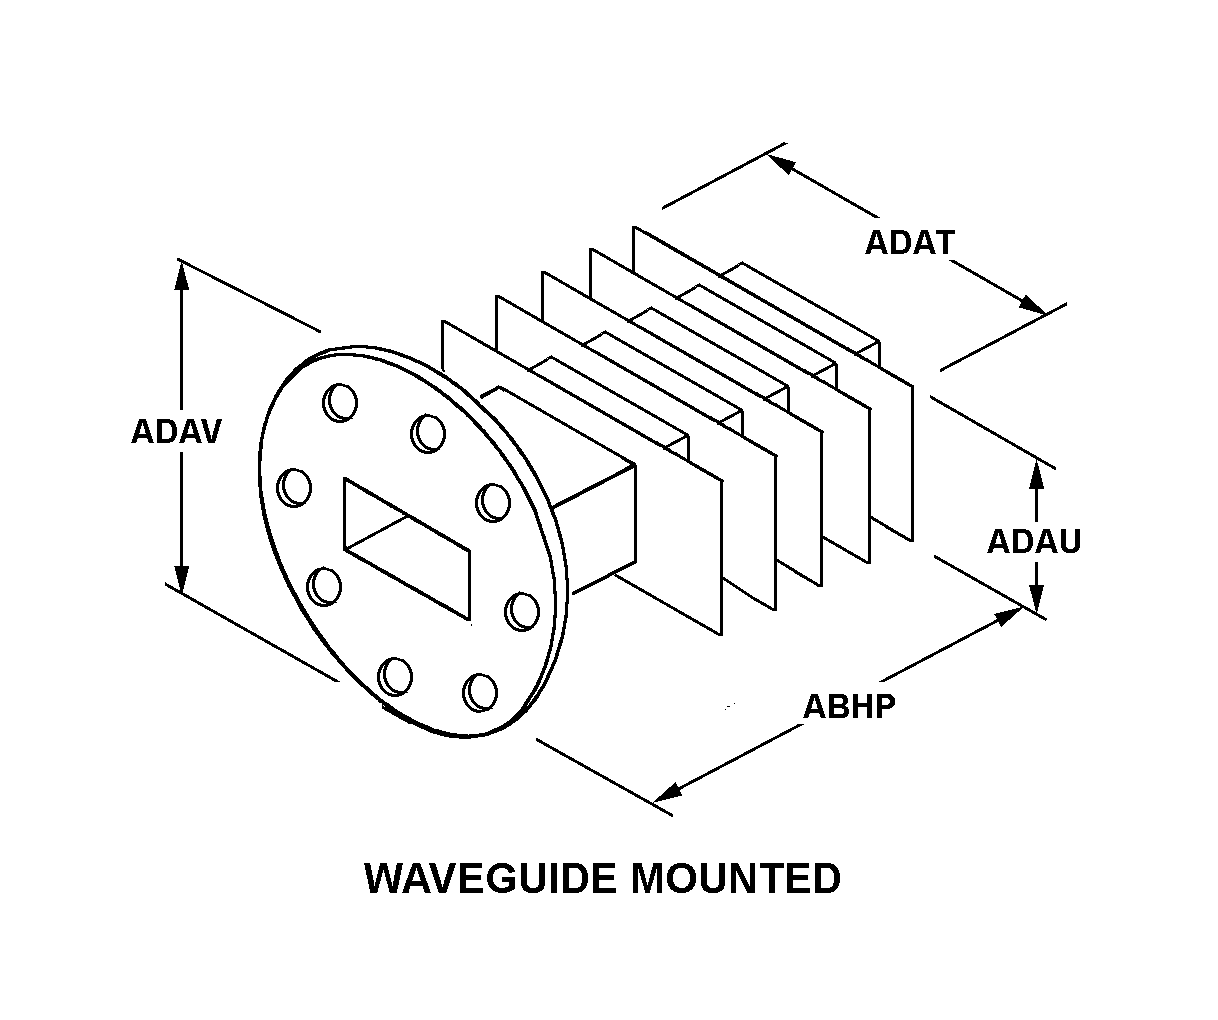 WAVEGUIDE MOUNTED style nsn 5985-00-445-6924